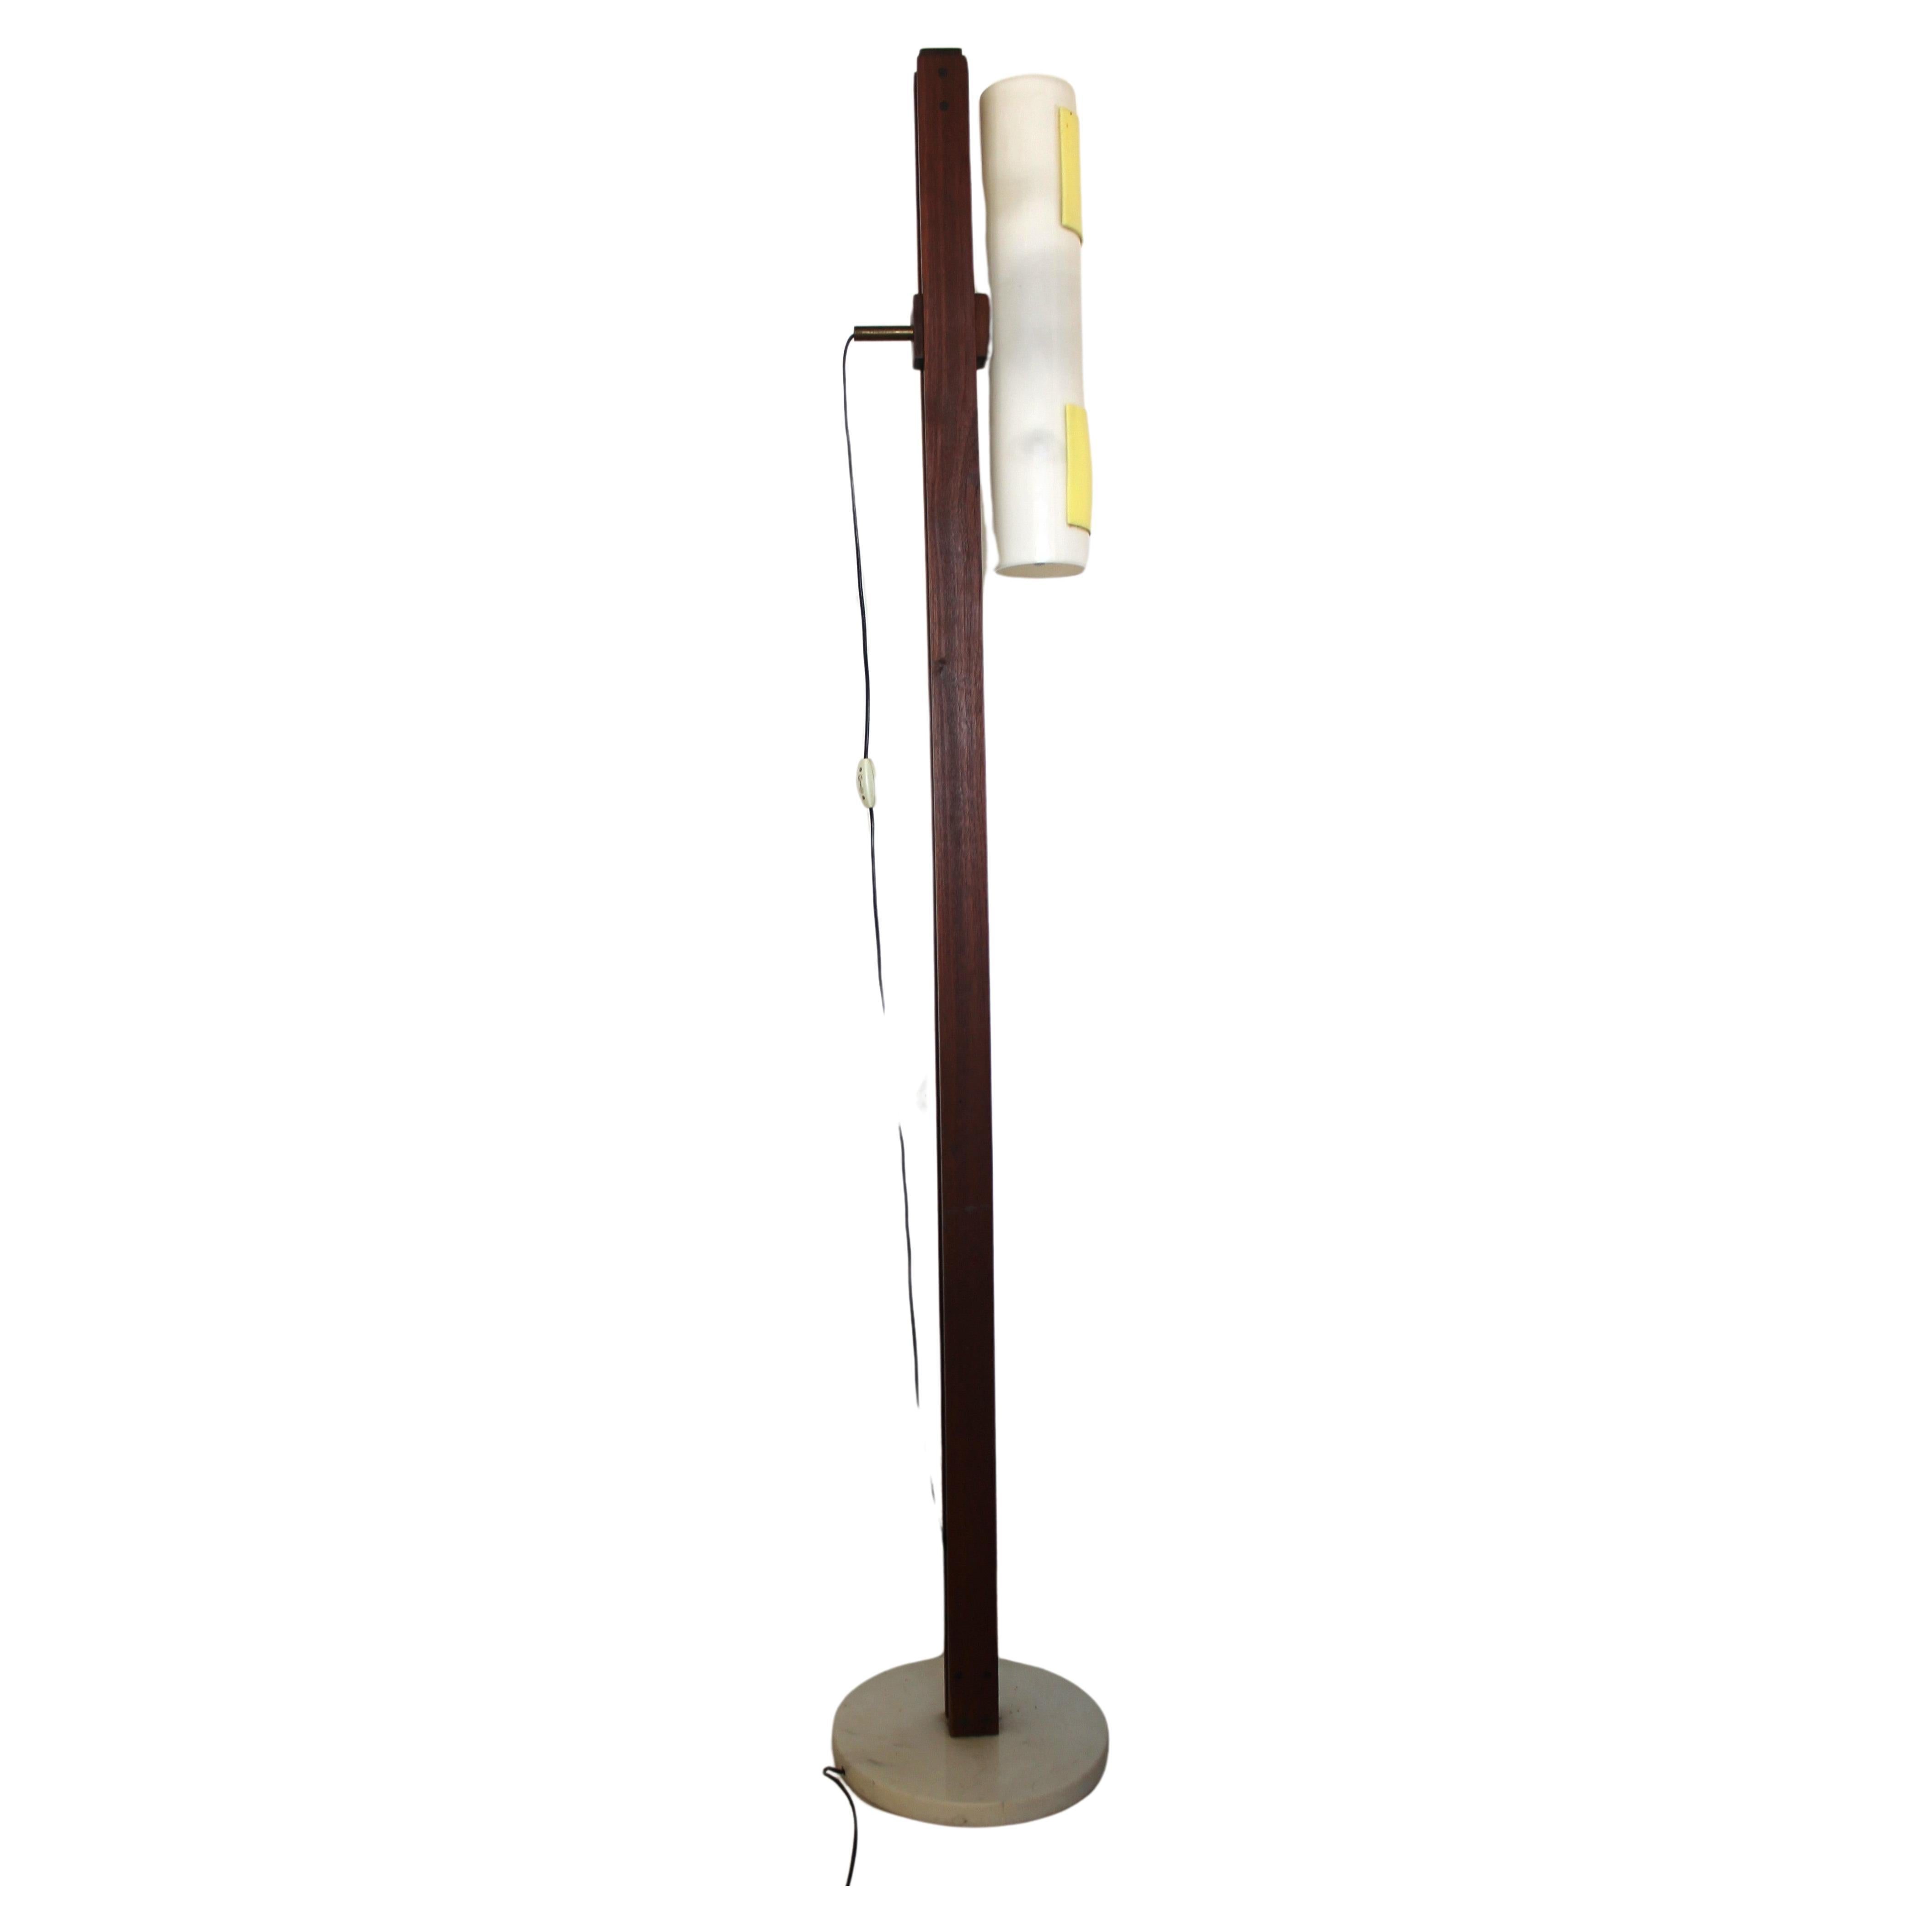 MidCentury Italian Floor Lamp with flowing white and yellow diffuser, 1960s. For Sale